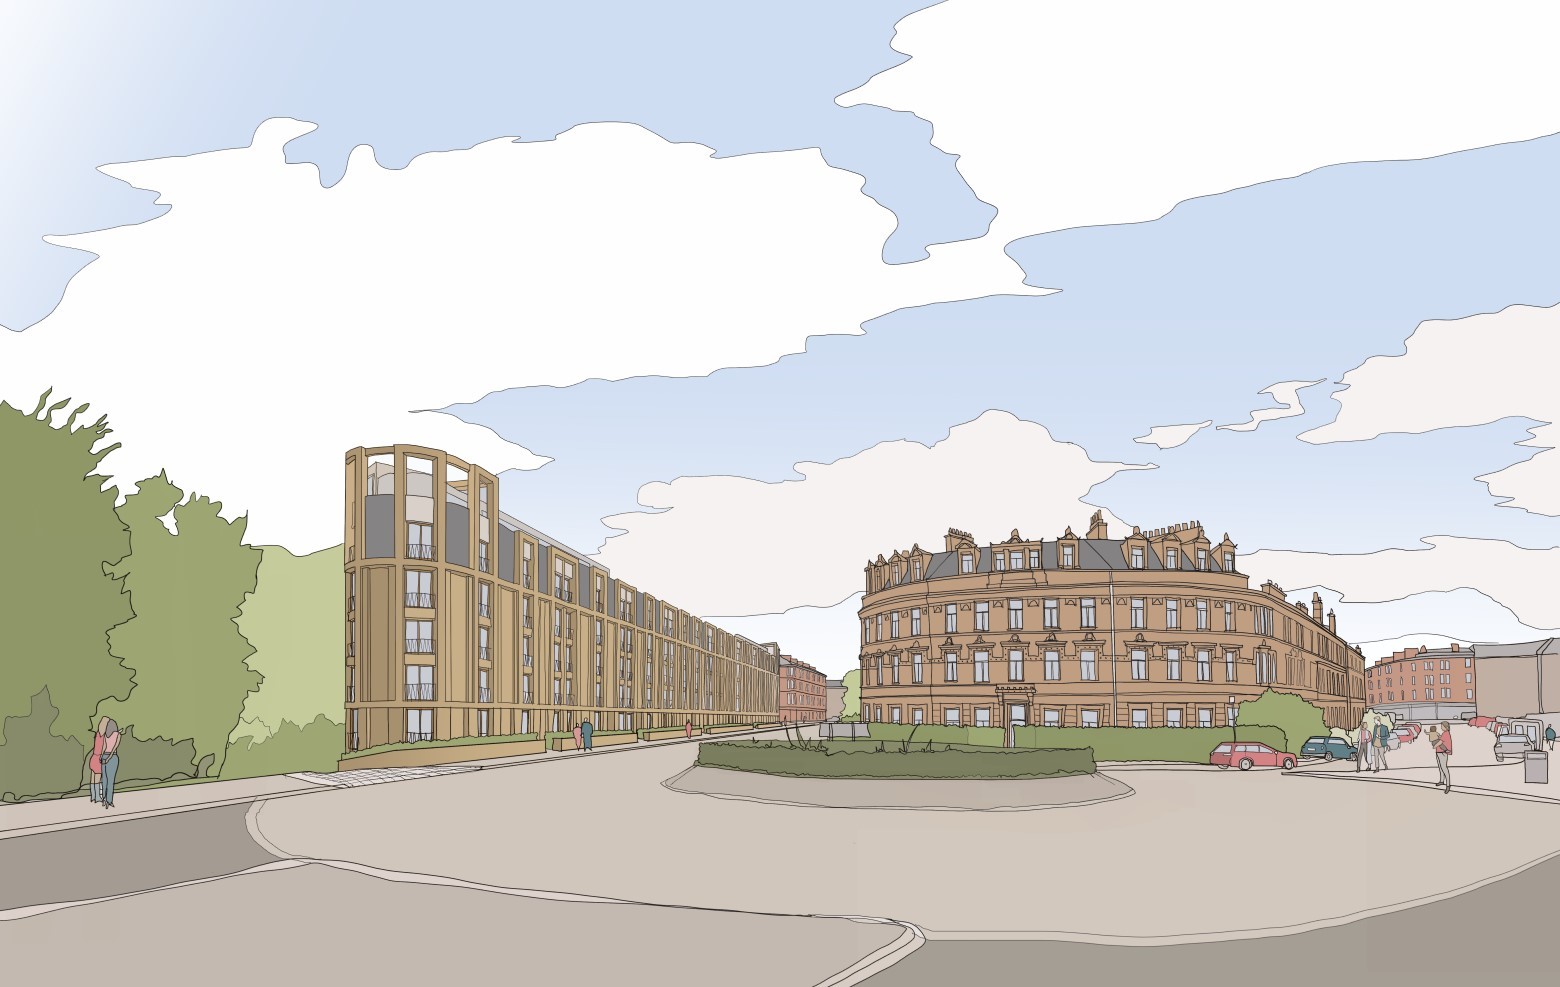 Consultation launched for Alexander ‘Greek’ Thomson-inspired flats in Glasgow